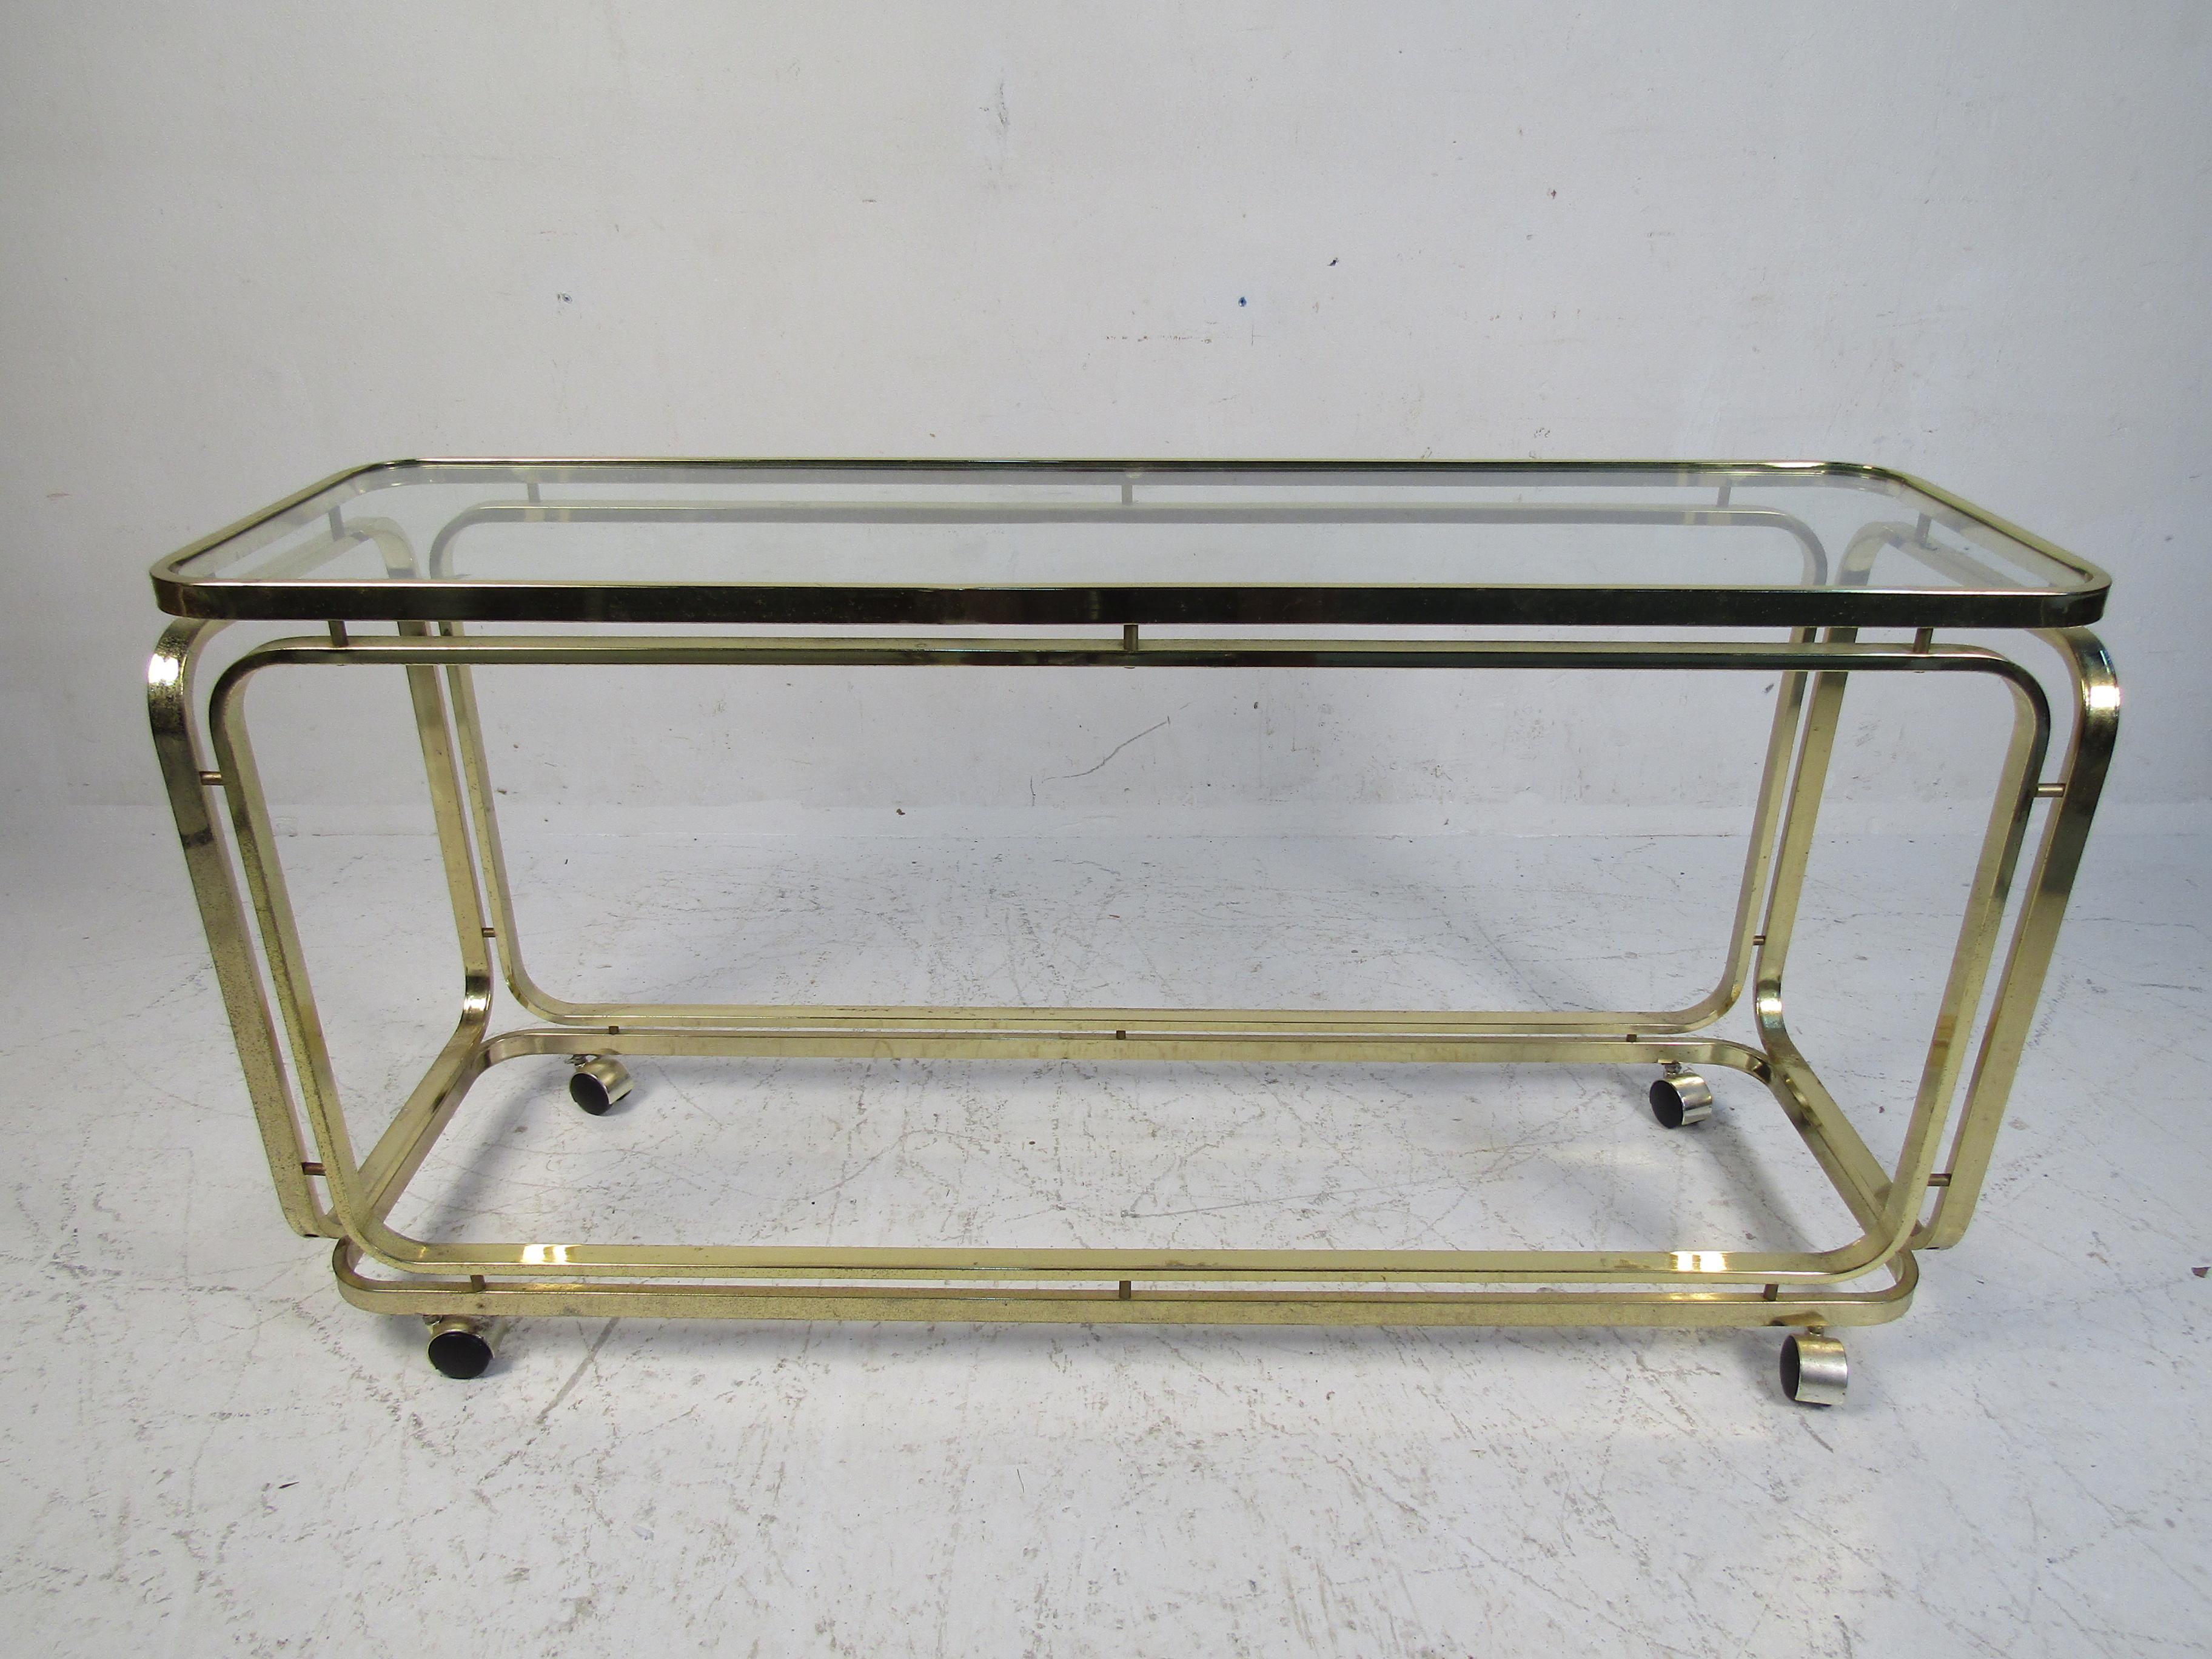 Long rolling cart in polished brass with two shelves. Used as a bar cart or rolling console table.
(Please confirm item location - NY or NJ - with dealer).
  